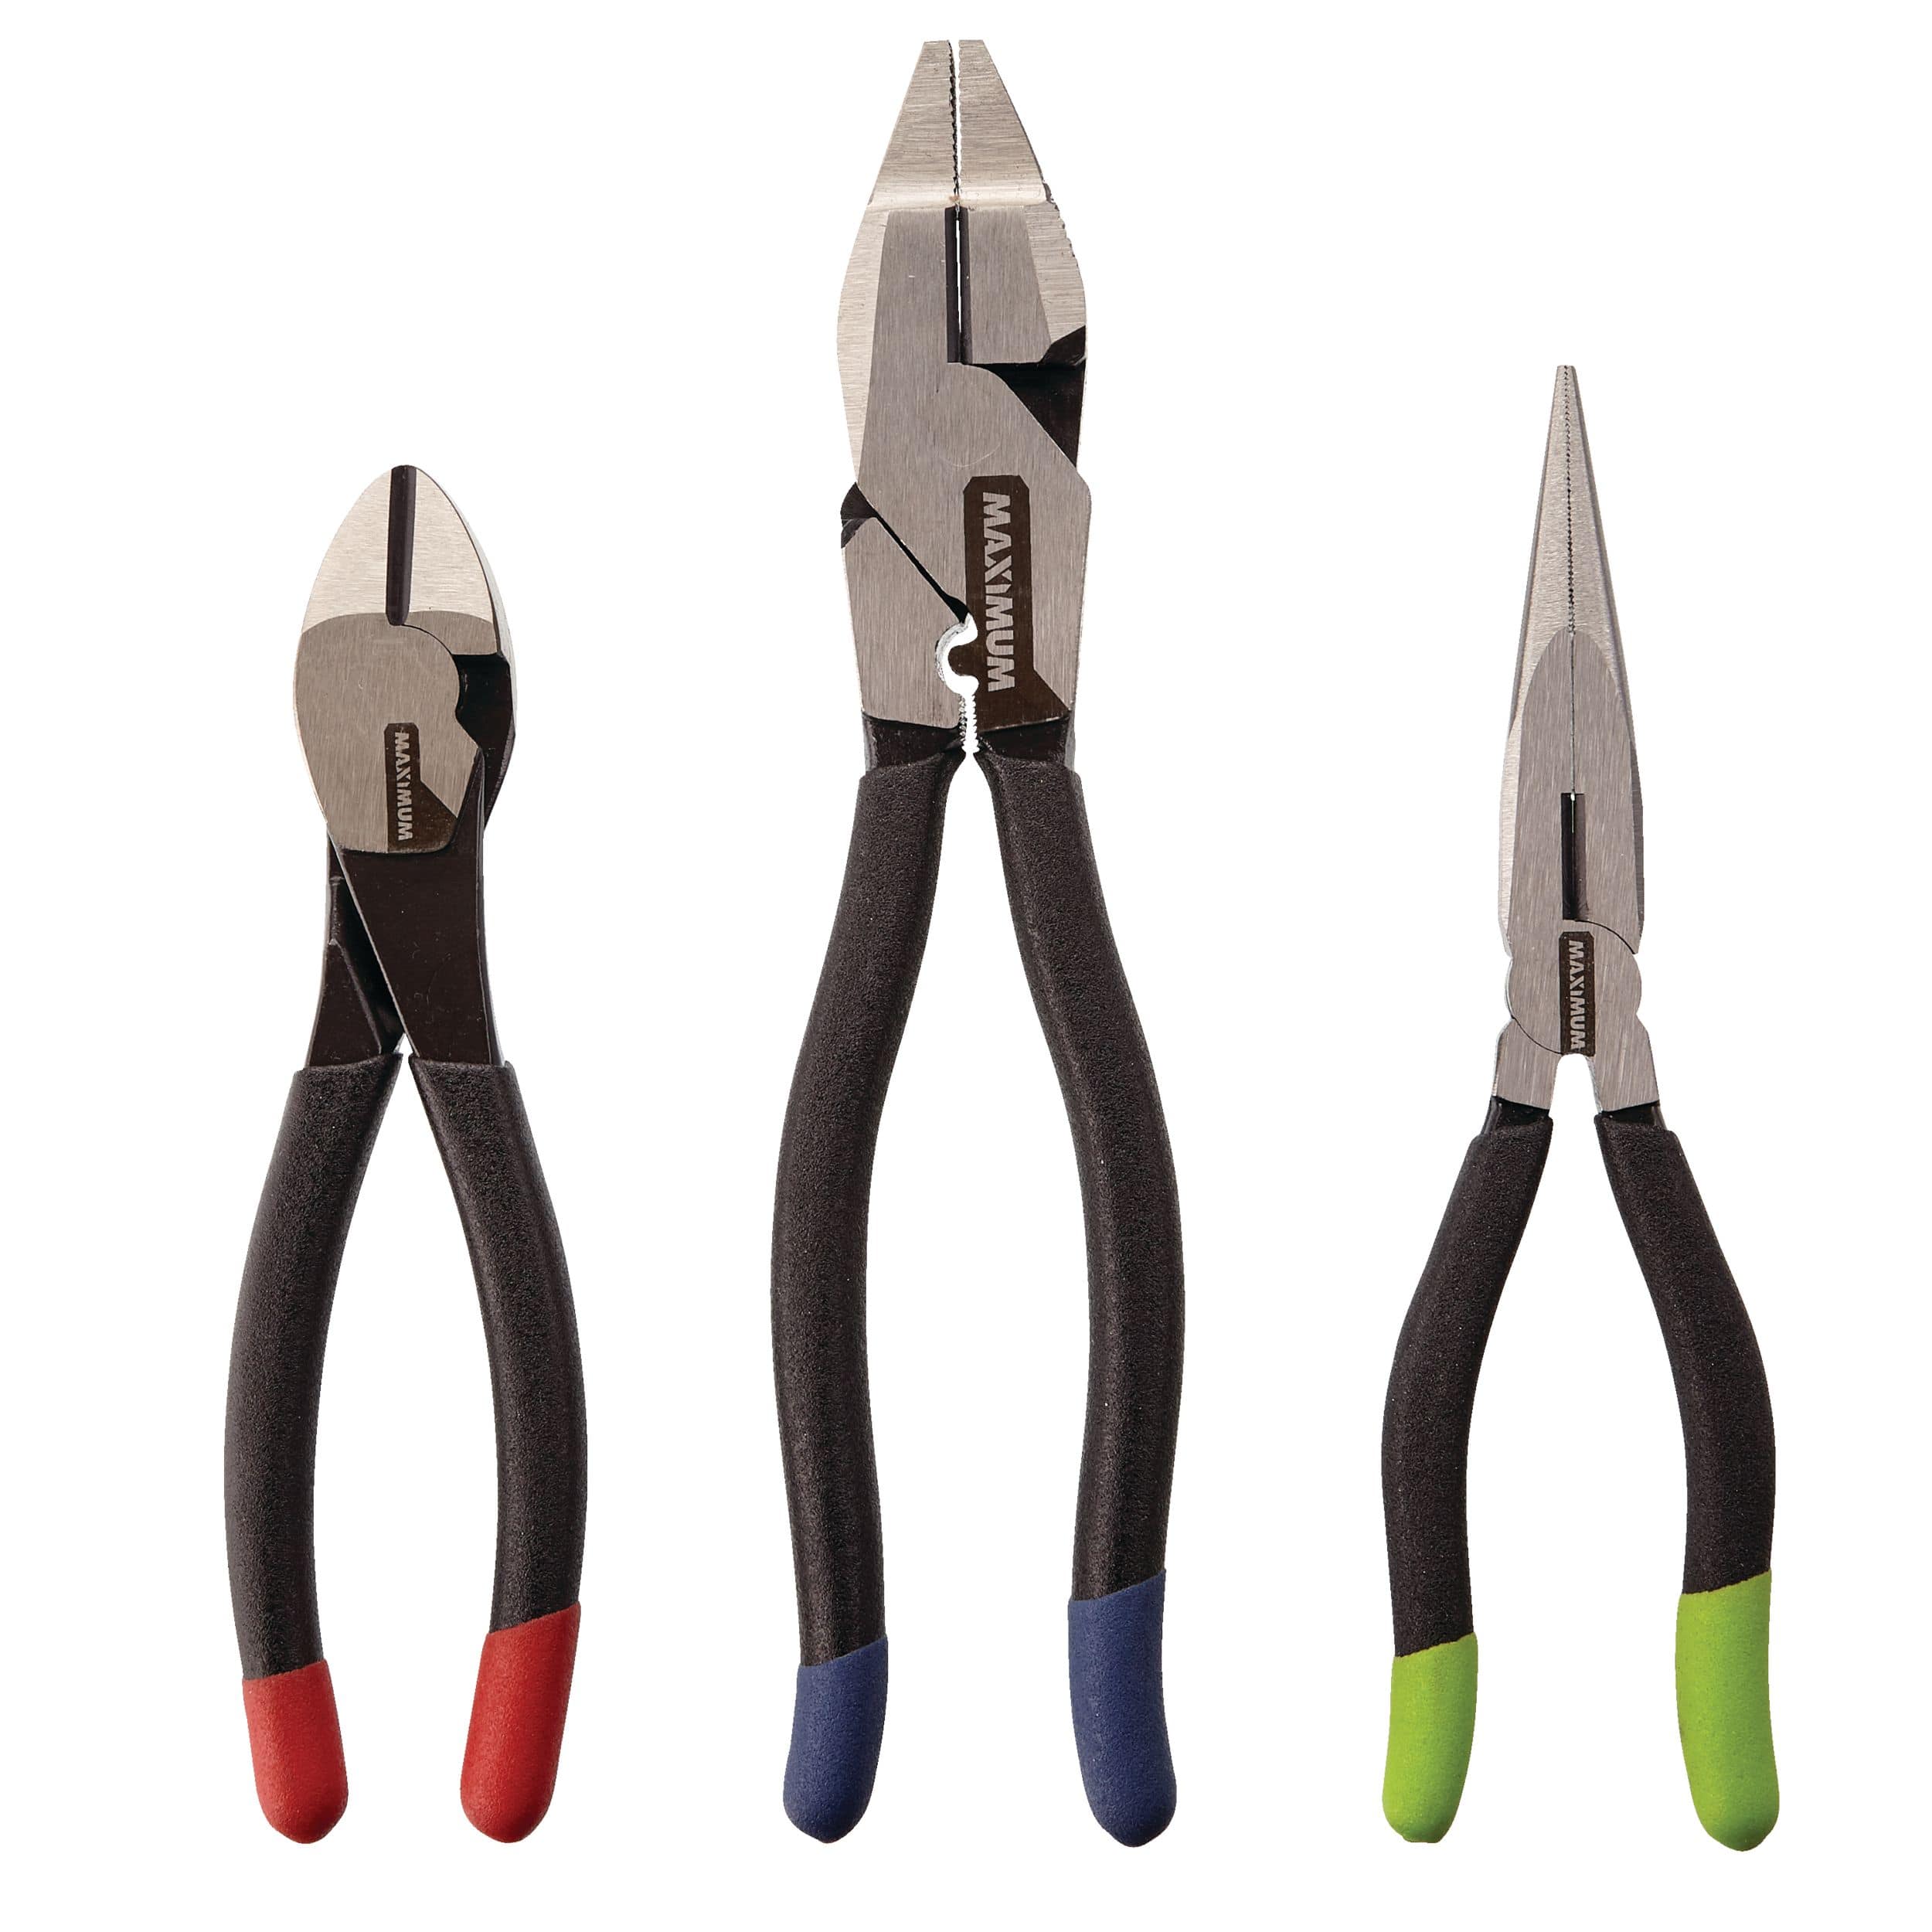 MAXIMUM Pliers Set, High-Quality Forged Tool Steel, Soft Vinyl Grip, Colour  Coded Tips, 3-pc